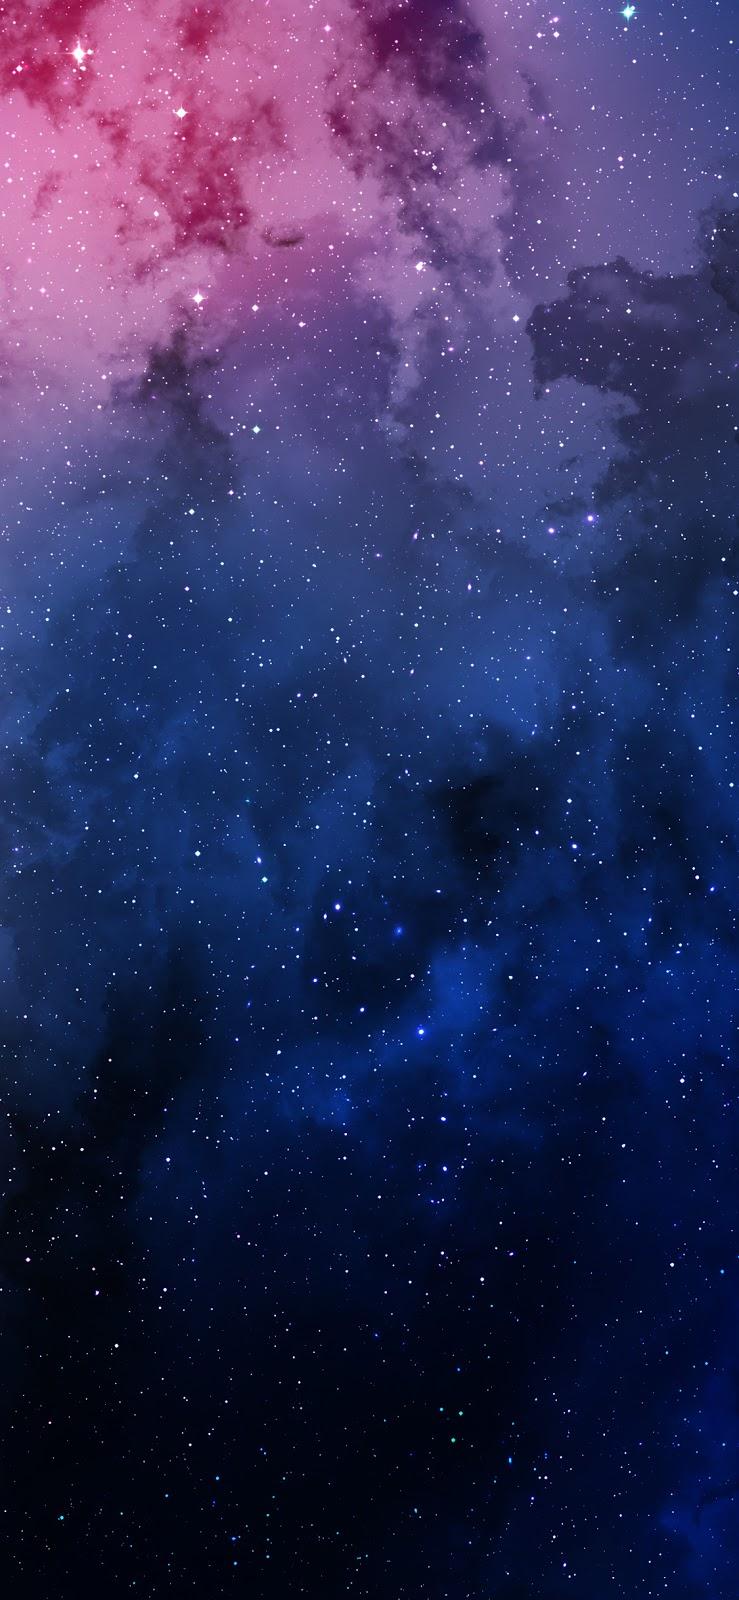 Colorful space wallpaper iphone x